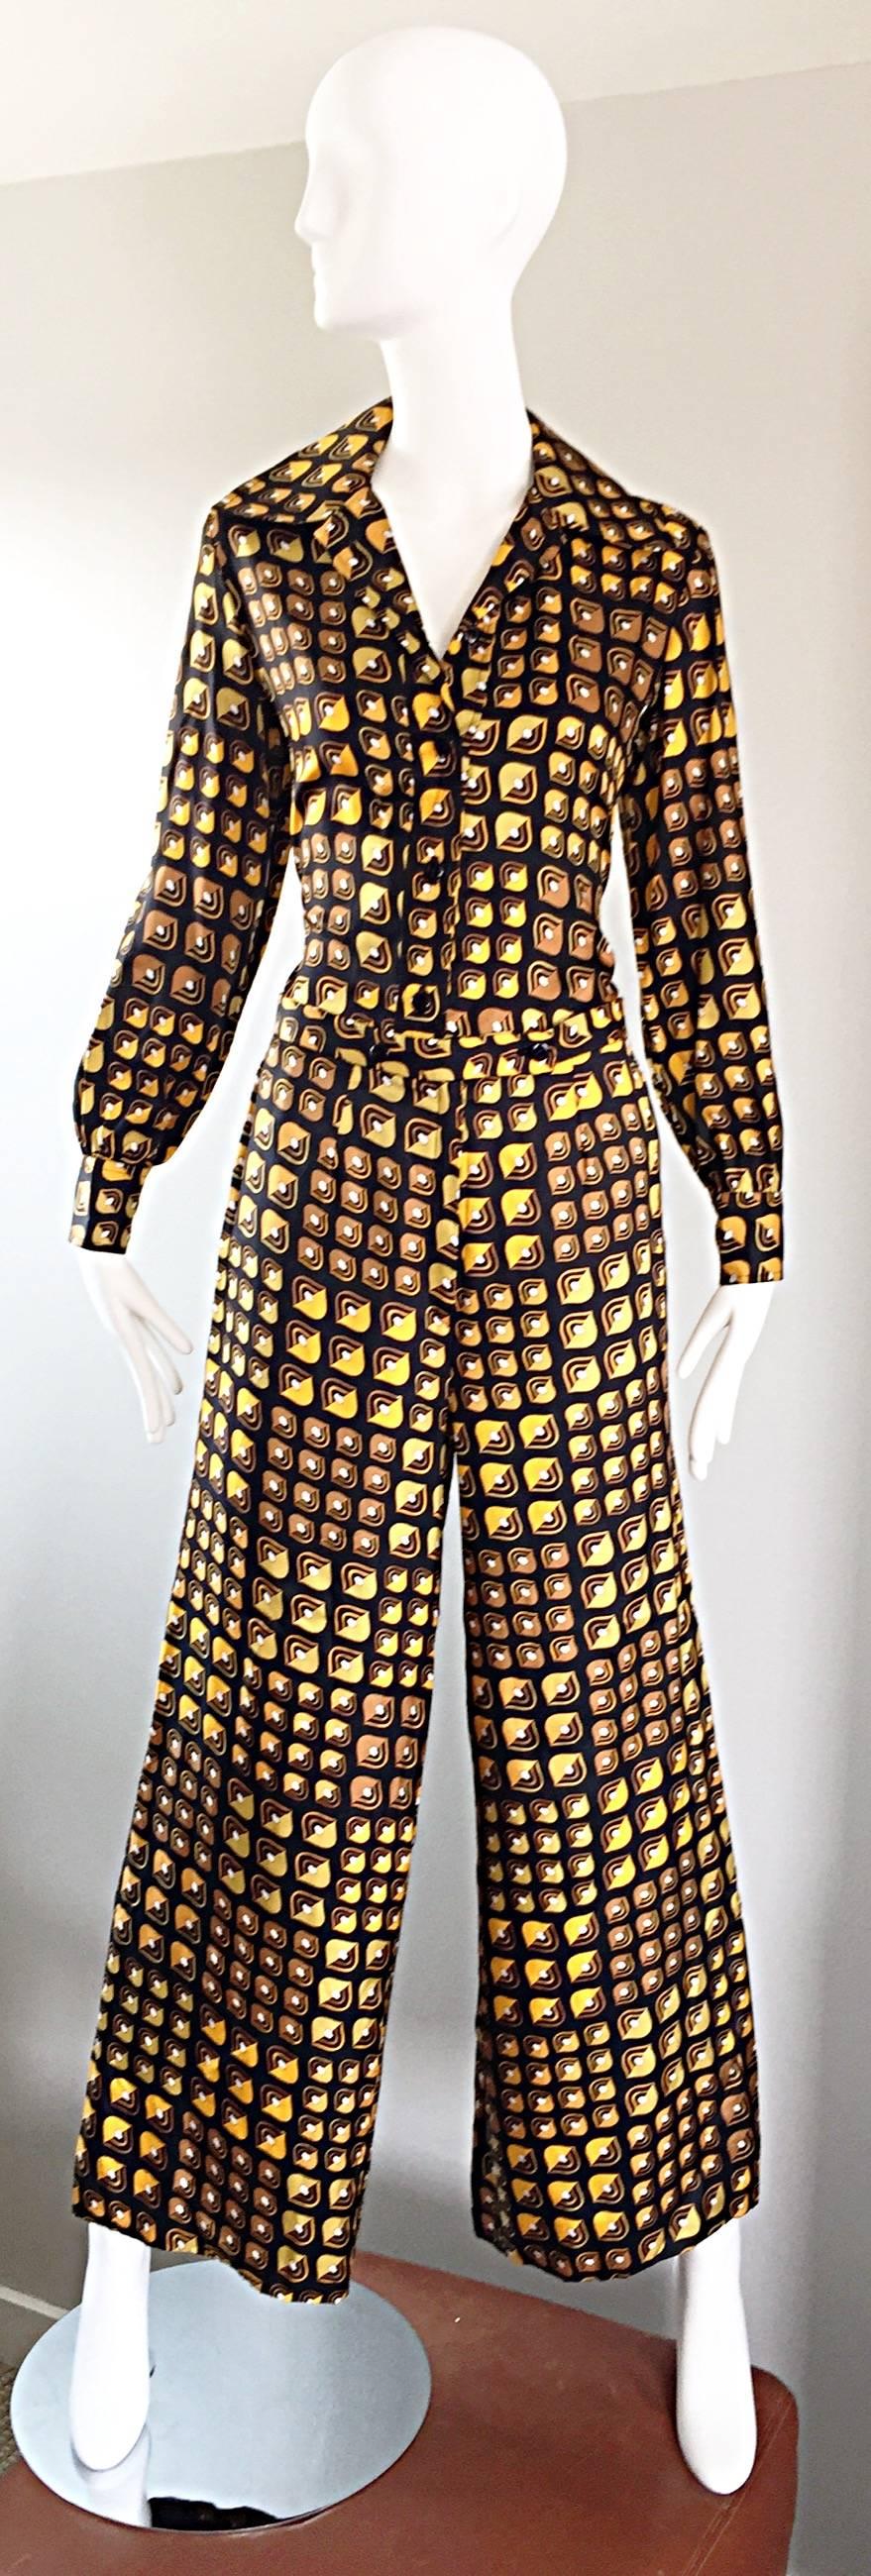 Exceptional and rare vintage 70s LANVIN silk top and pants set! Wonderful yellow, brown, black, and amber geometric 3-D print throughout. Fitted blouse with signature wide lapels, and two pockets on each side of the bottom hem. Buttons up center